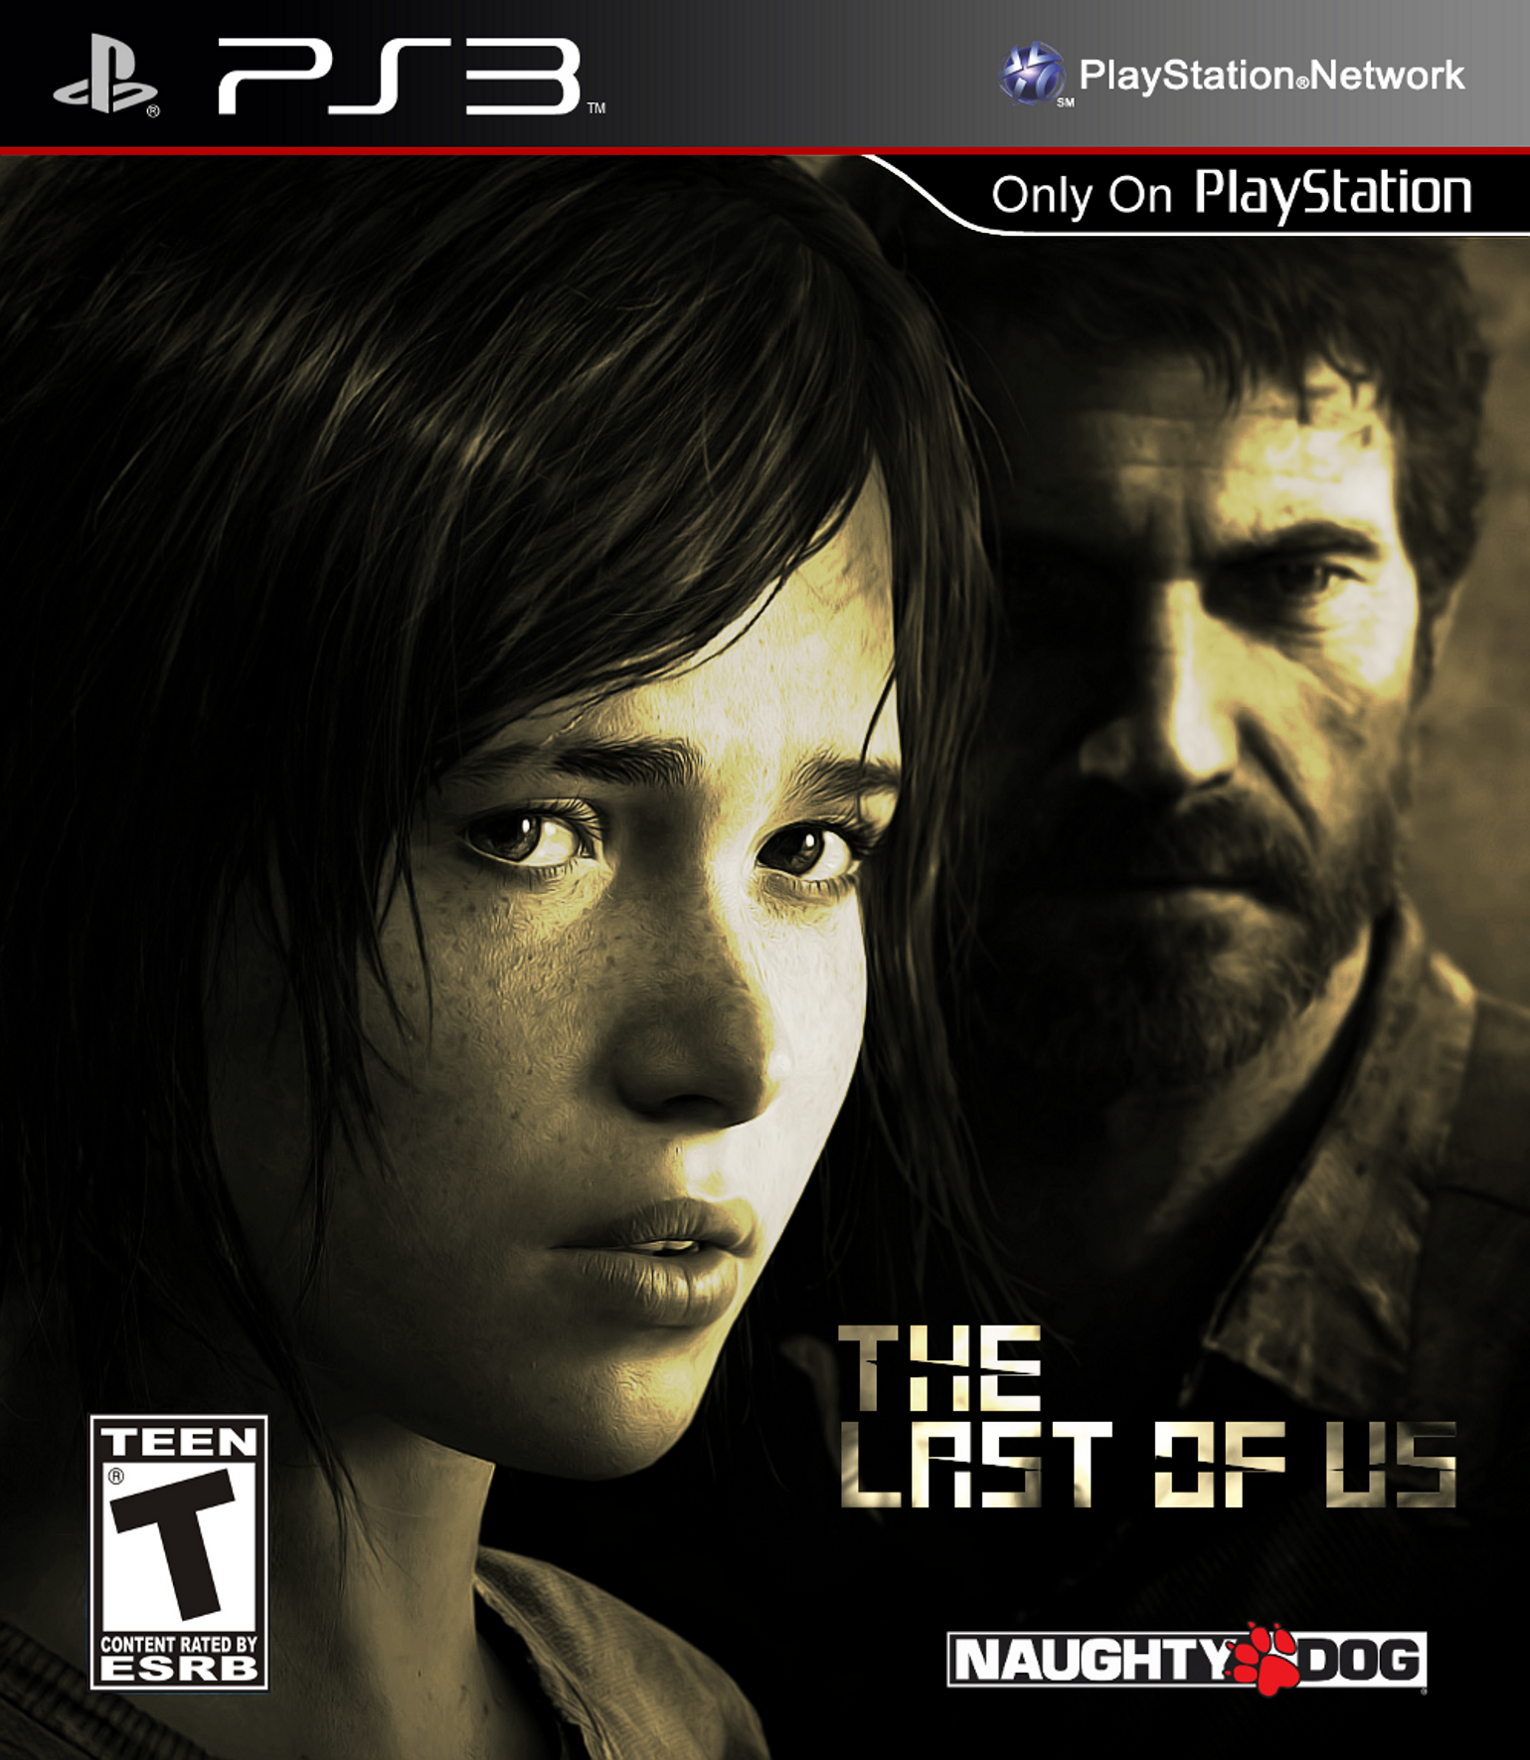 http://vgboxart.com/boxes/PS3/49341-the-last-of-us-old-full.png